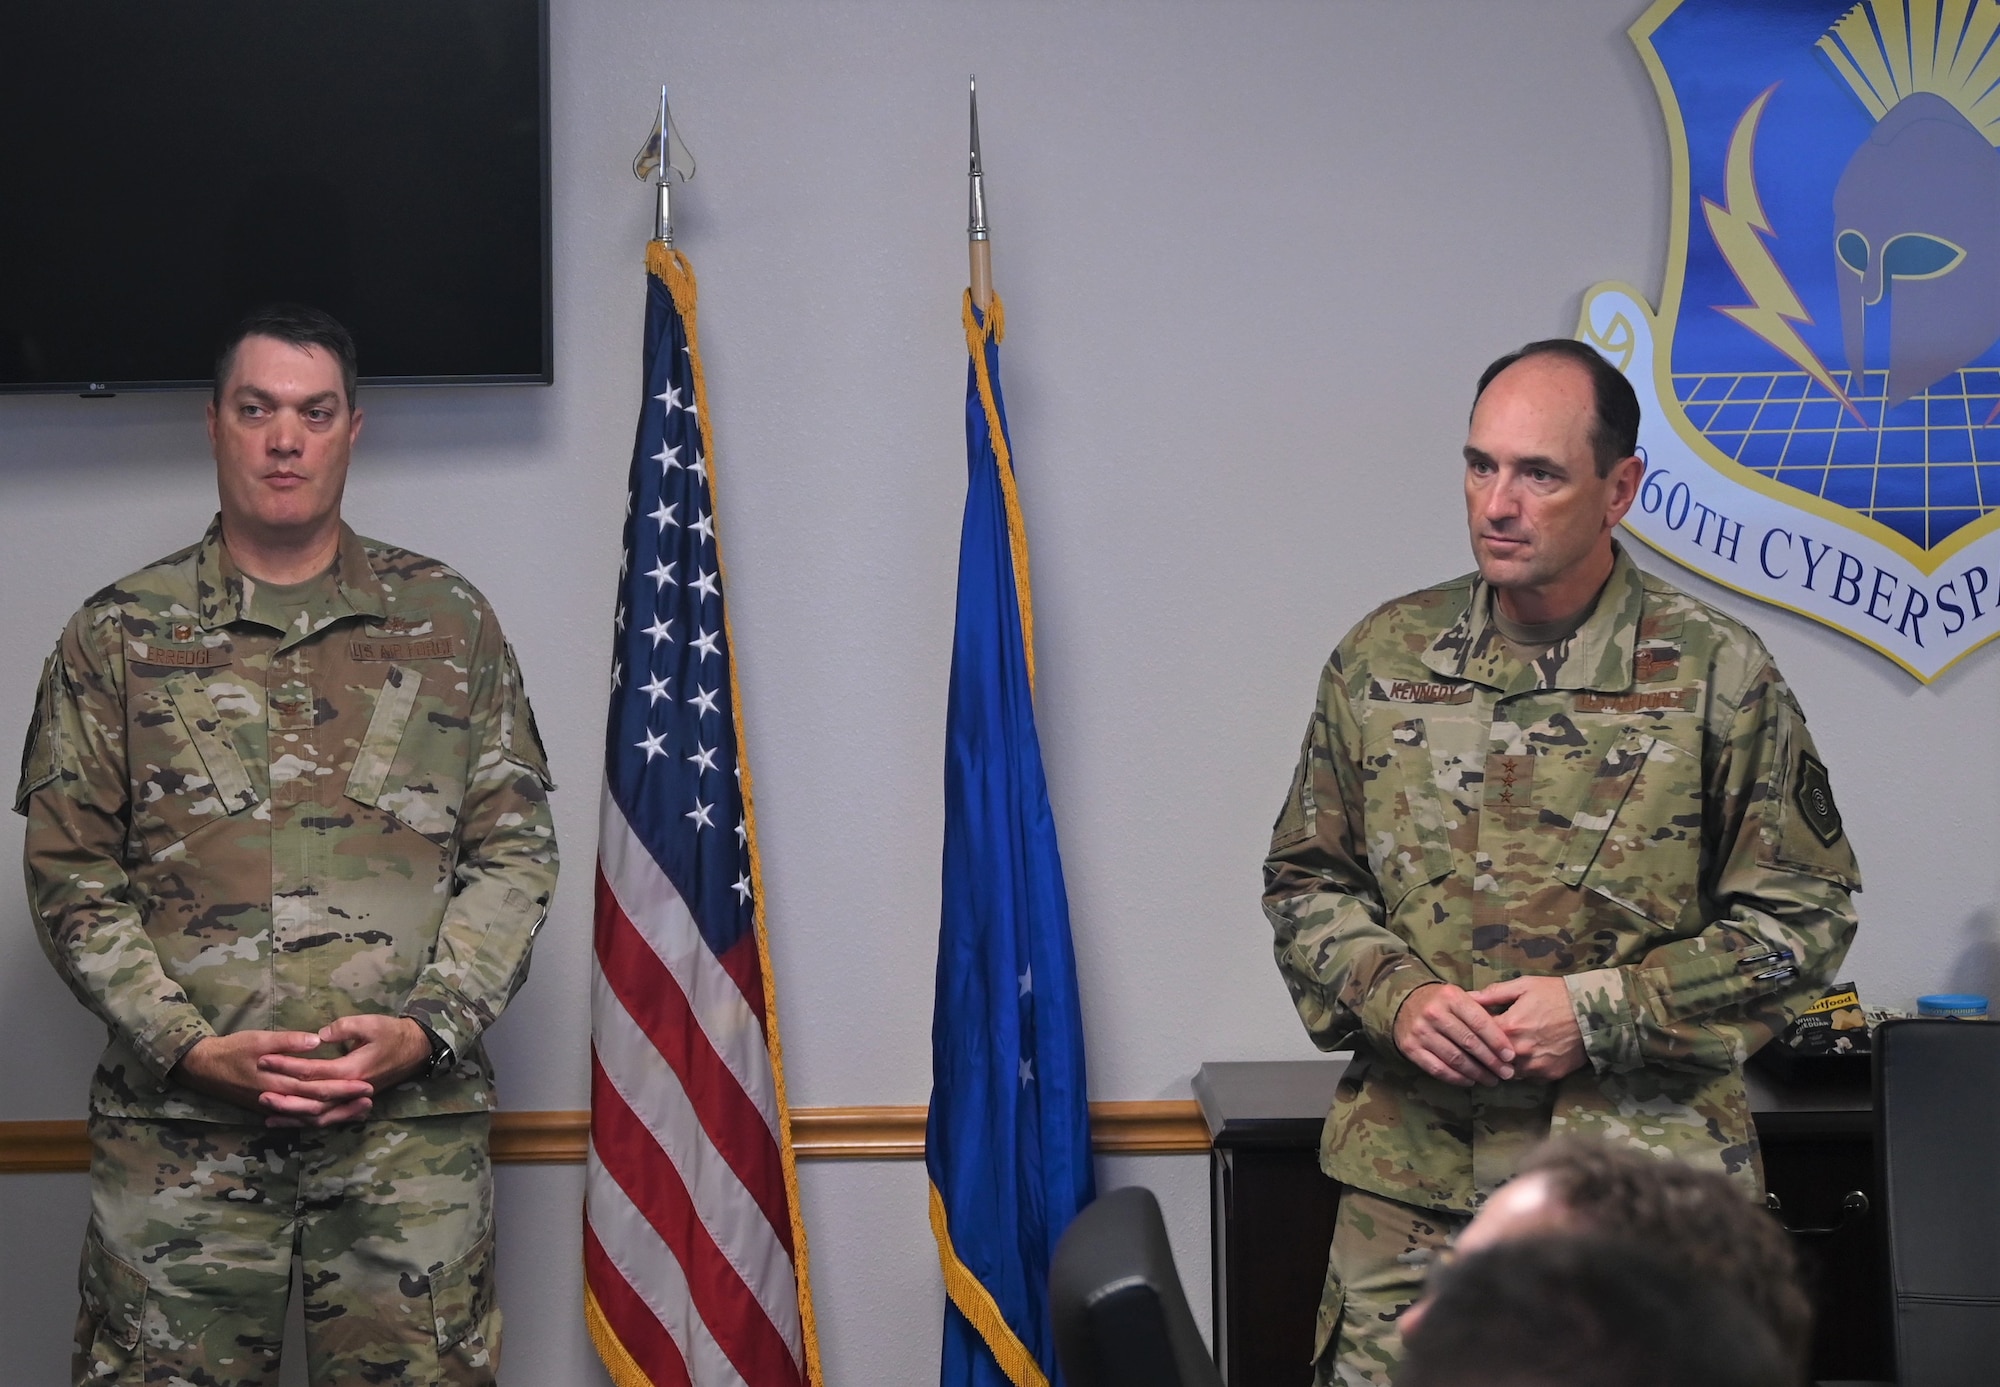 Lt. Gen. Kevin B. Kennedy is briefed by multiple personnel during his visit to the 960th Cyberspace Wing. Col. Richard Erredge provides further detail between speakers.